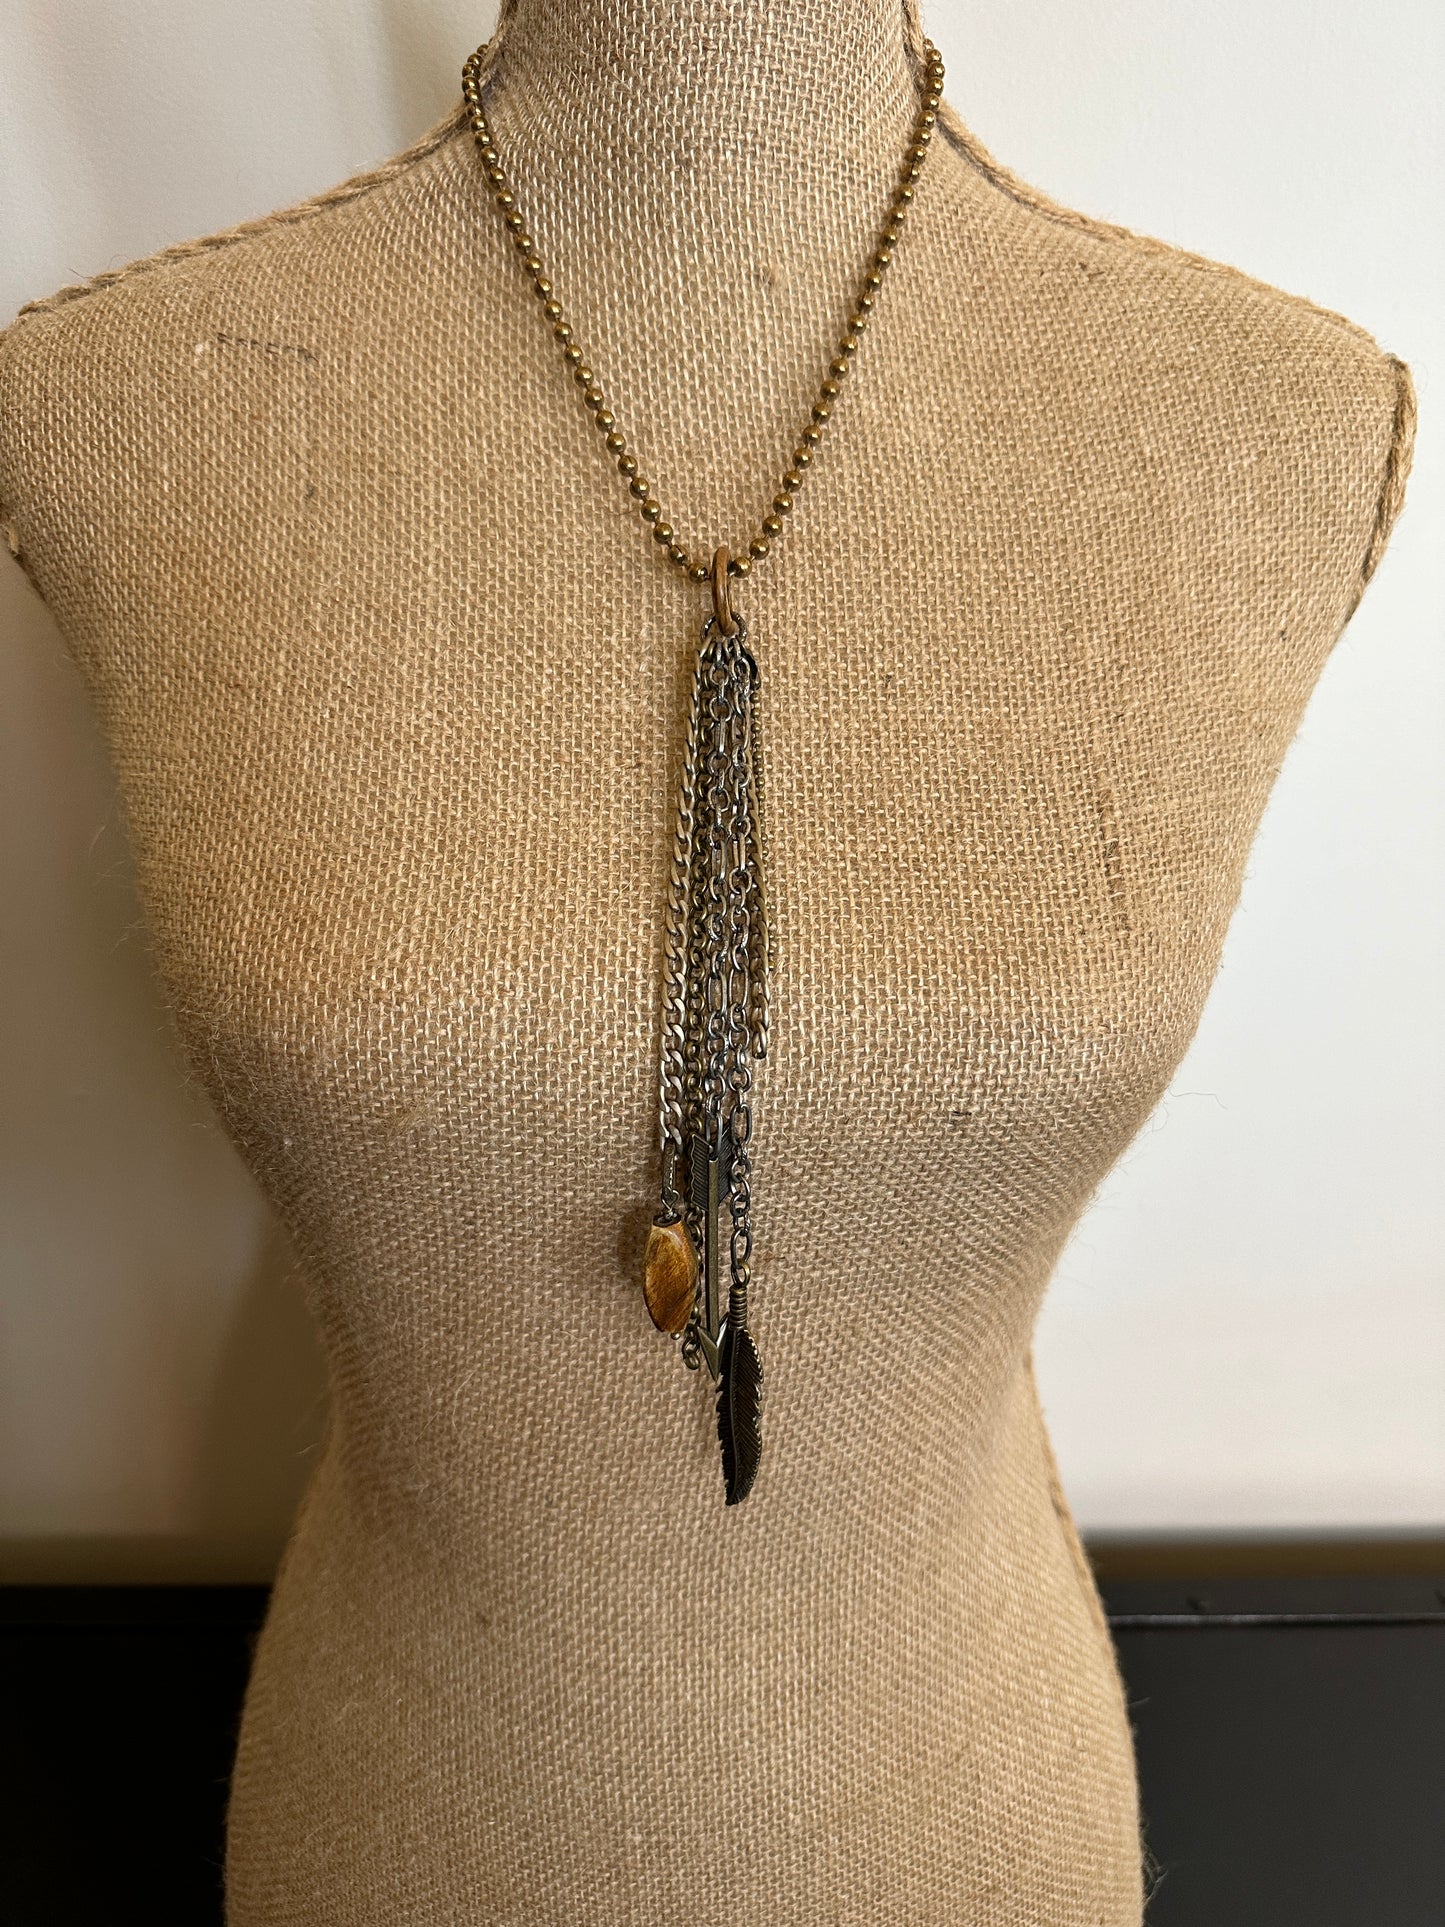 Chain Tassel Necklace on Ball Chain- Amy Kaplan for Bourbon Cowgirl